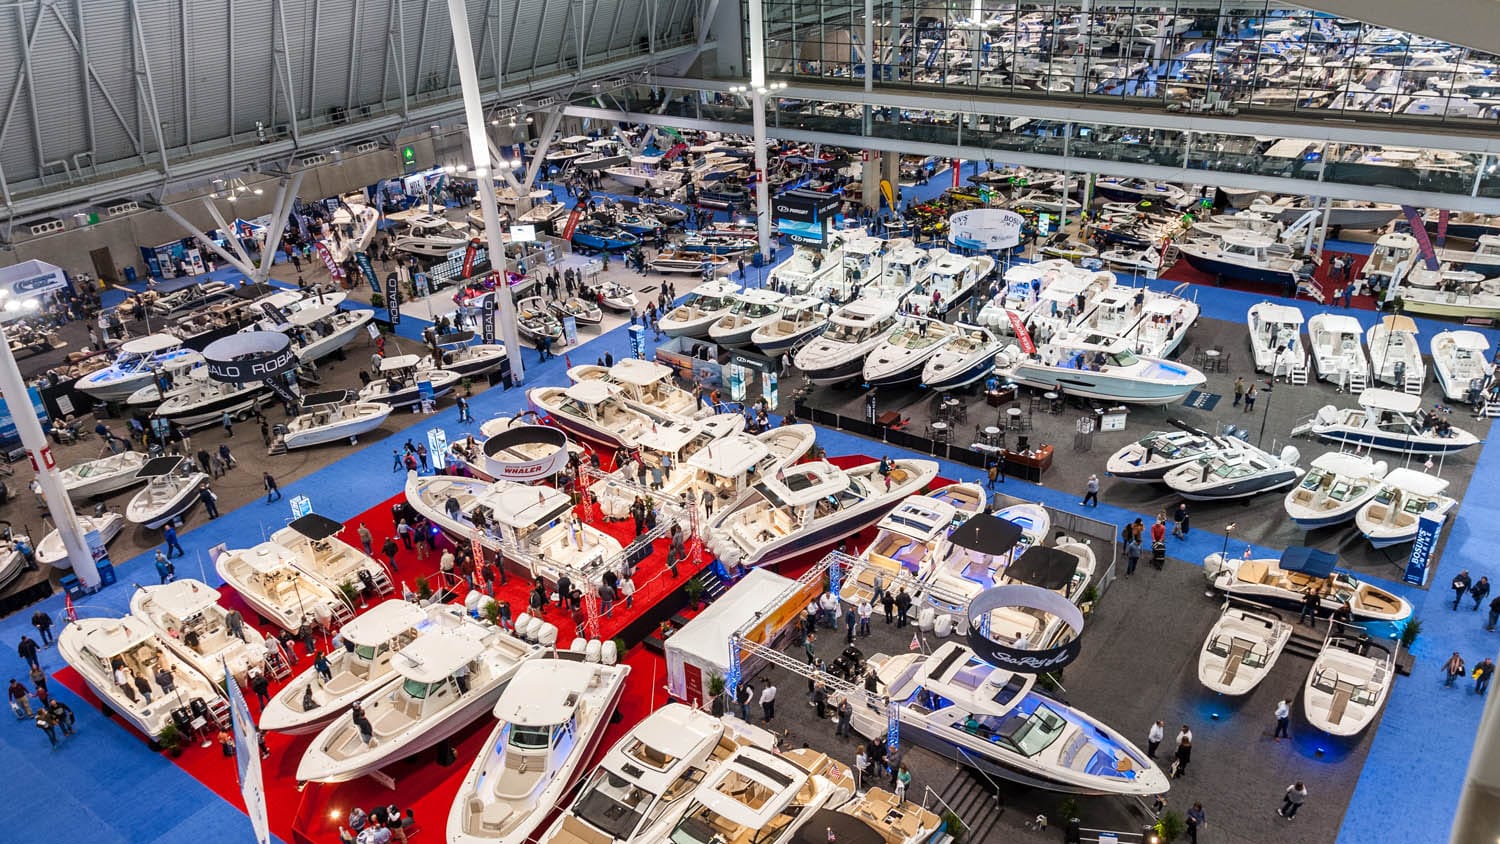 NE Boat Show overview, Boston Convention and Exhibition Center